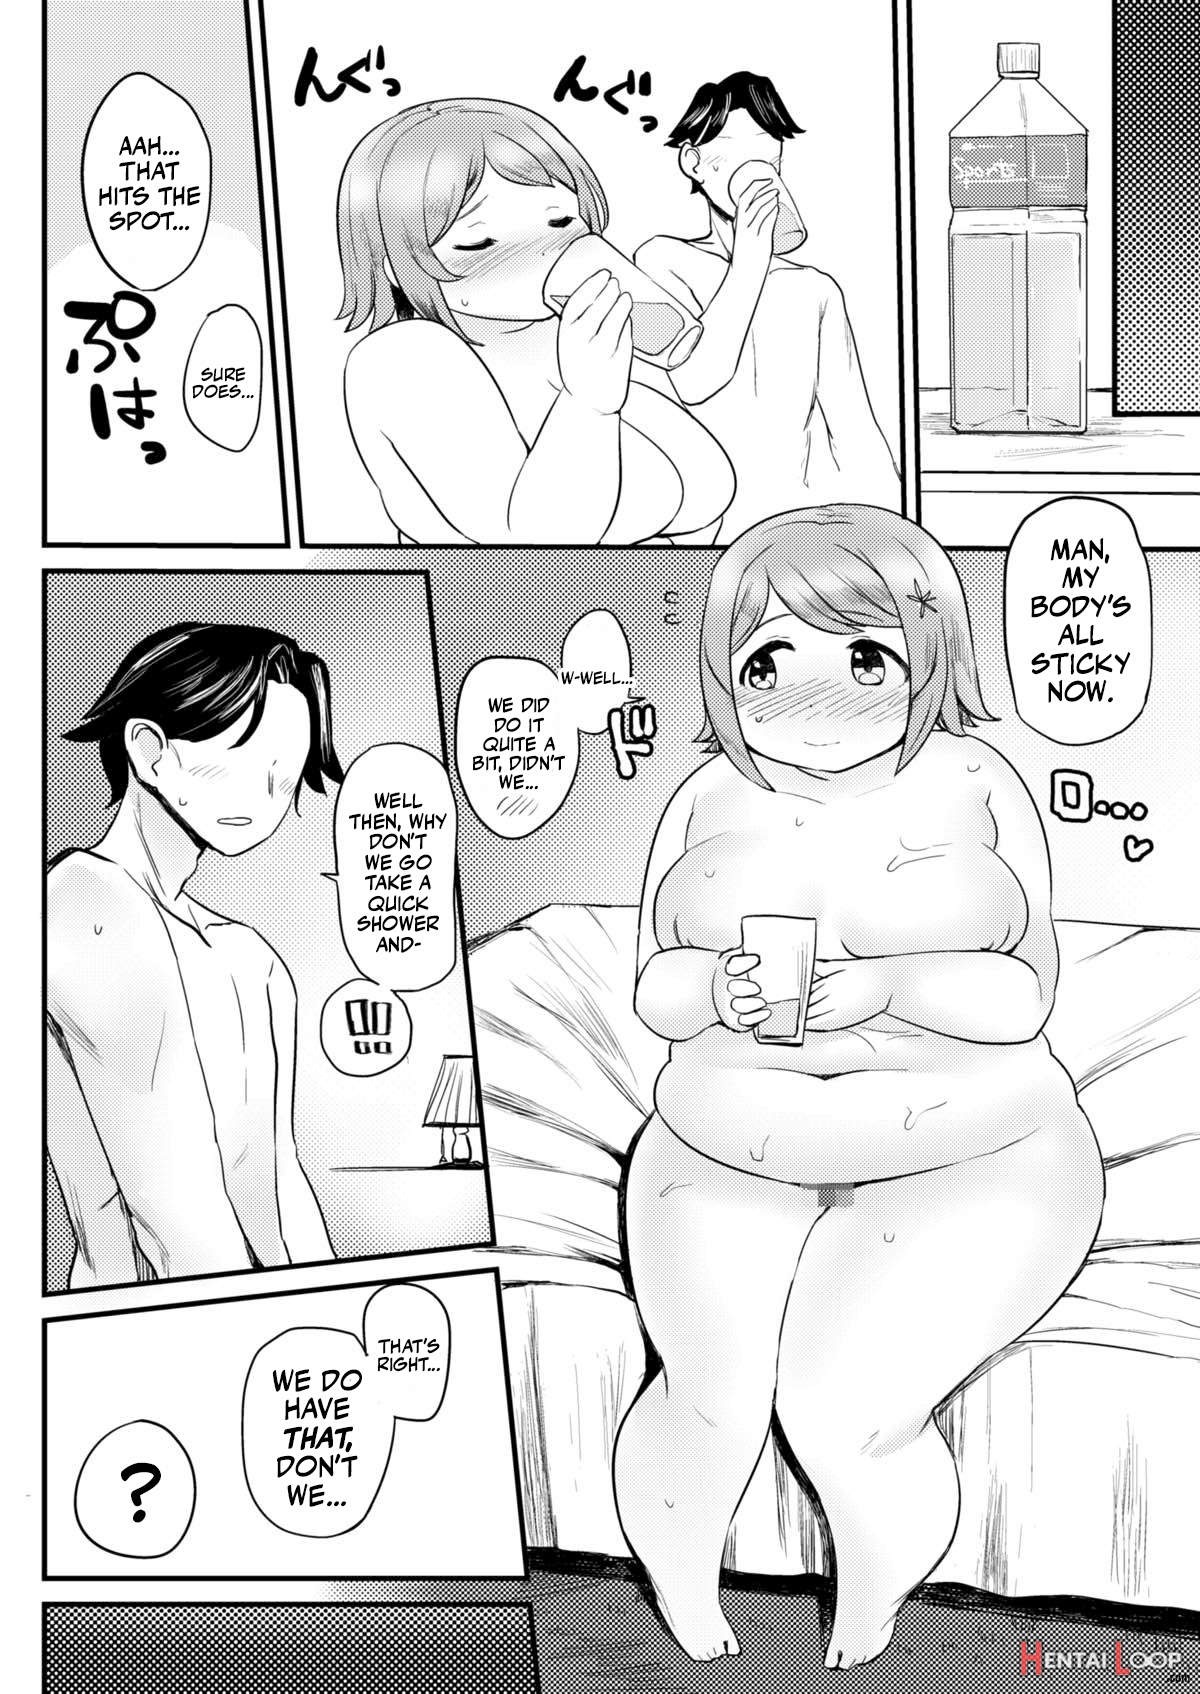 Kanako's Belly. page 27